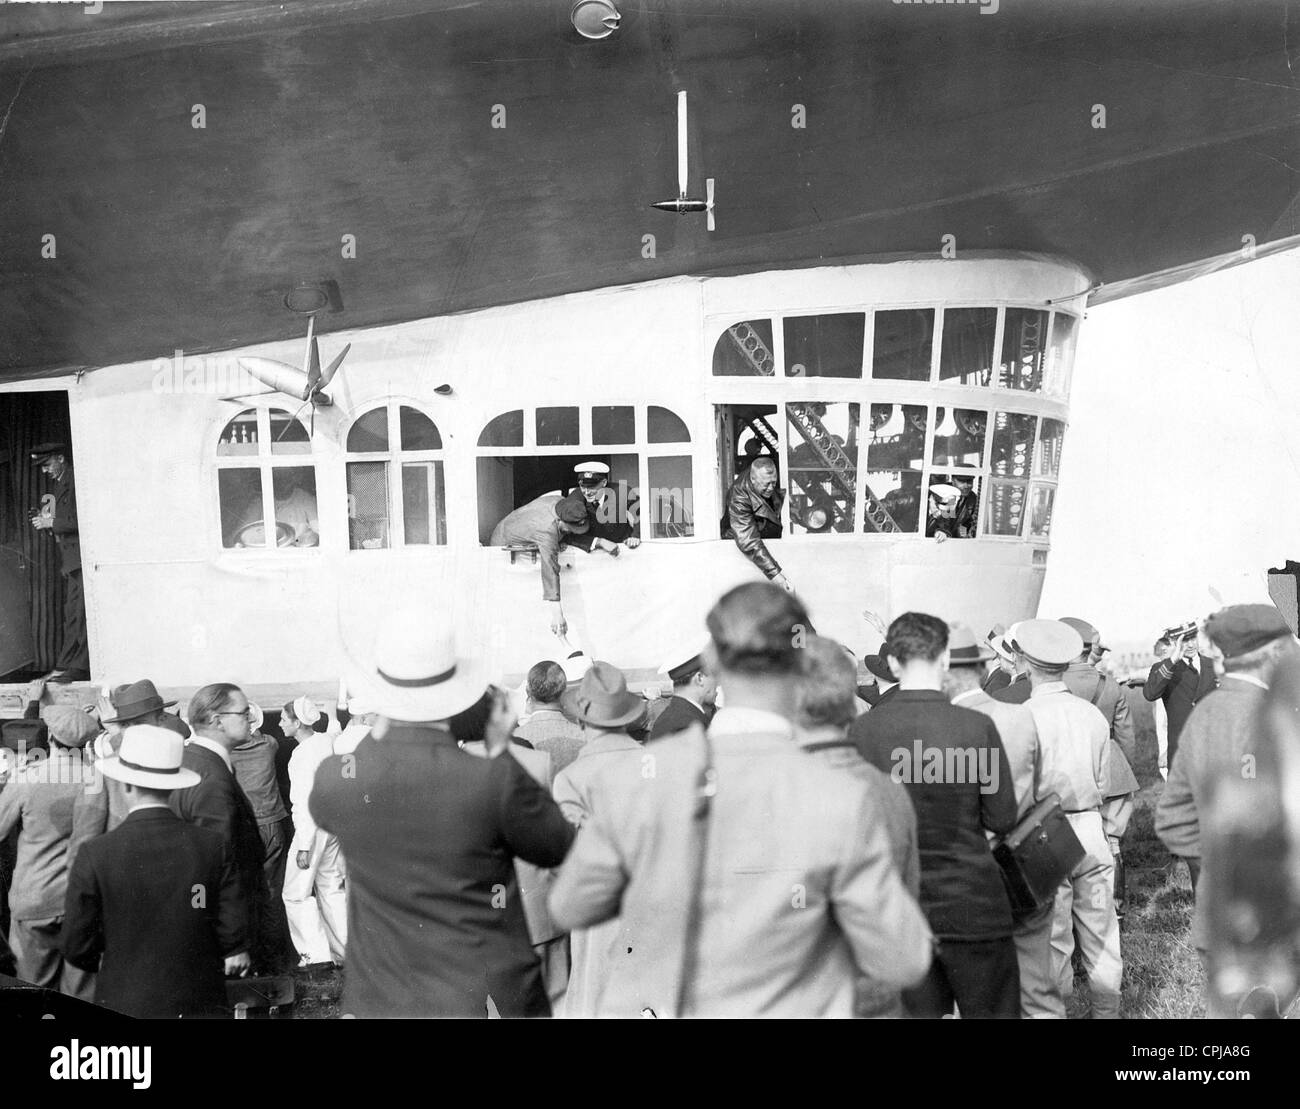 Arrival of the LZ 127 'Graf Zeppelin' in Lakehurst during the world trip, 1929 Stock Photo